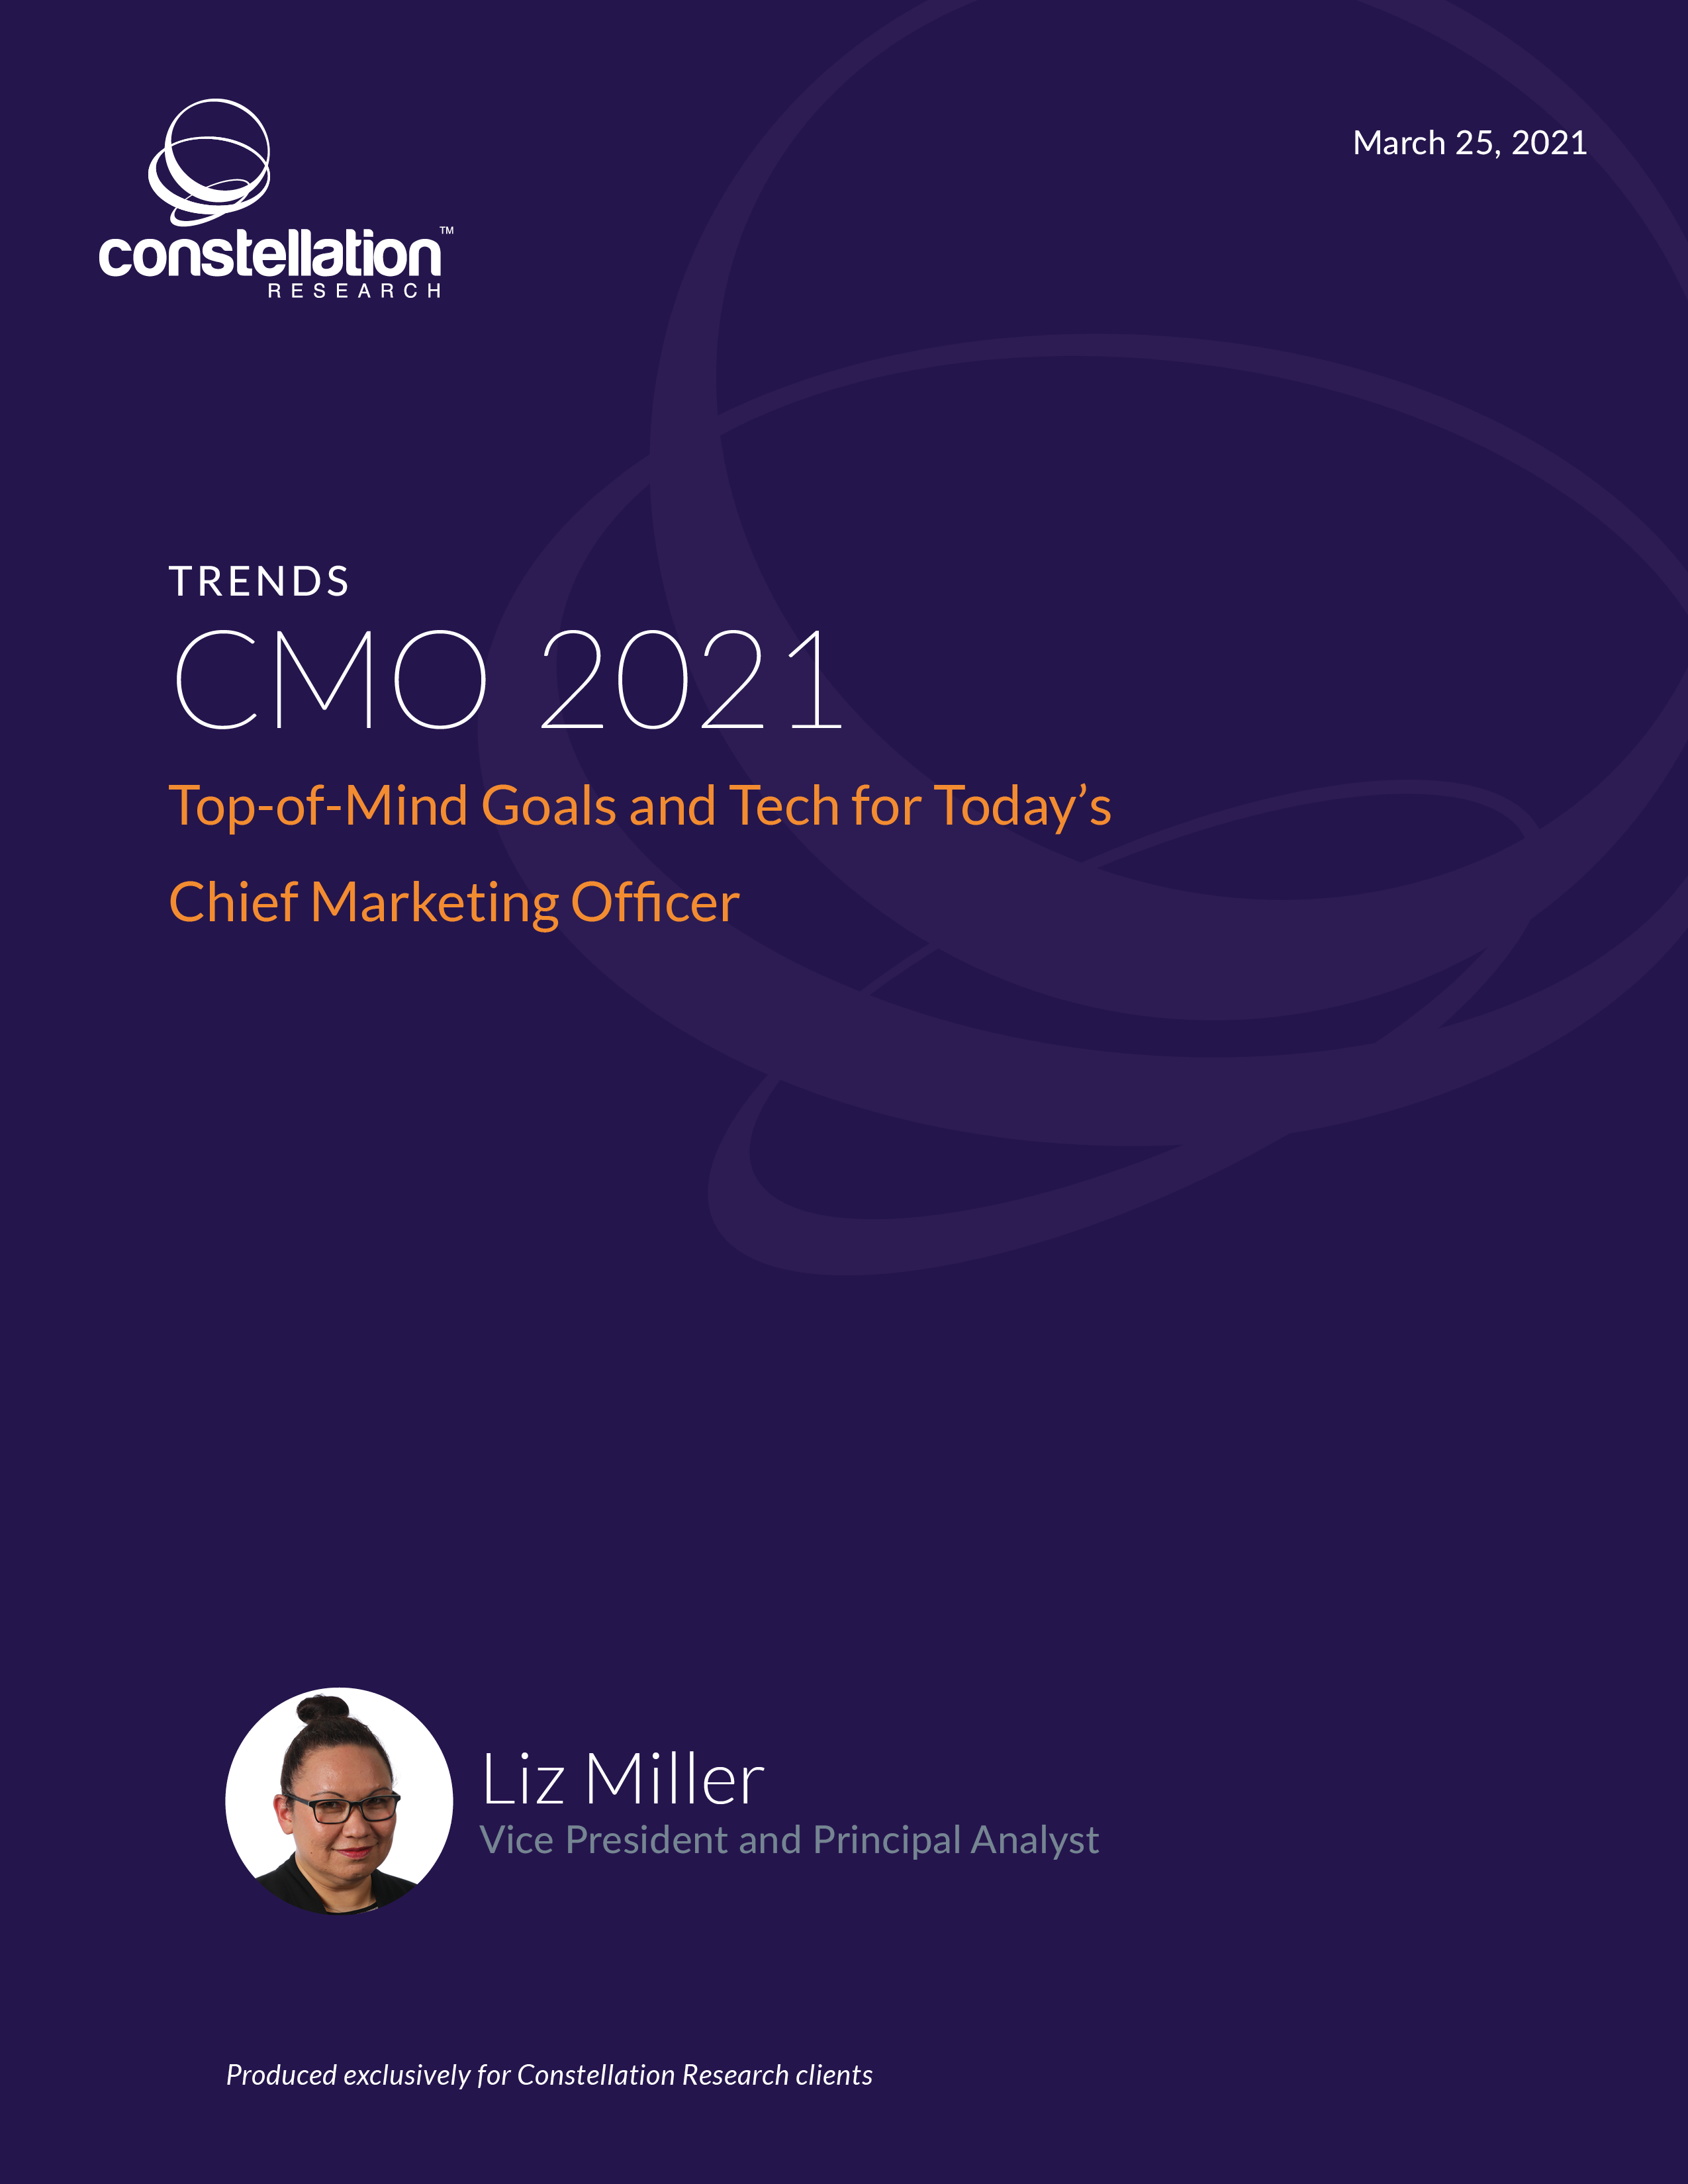 rwang0: MypOV: this is great! NEW Research – Trends: CMO 2021 https://t.co/UwVz3sEmVH by @lizkmiller @constellationr #Marketing #CMO #adobesummit